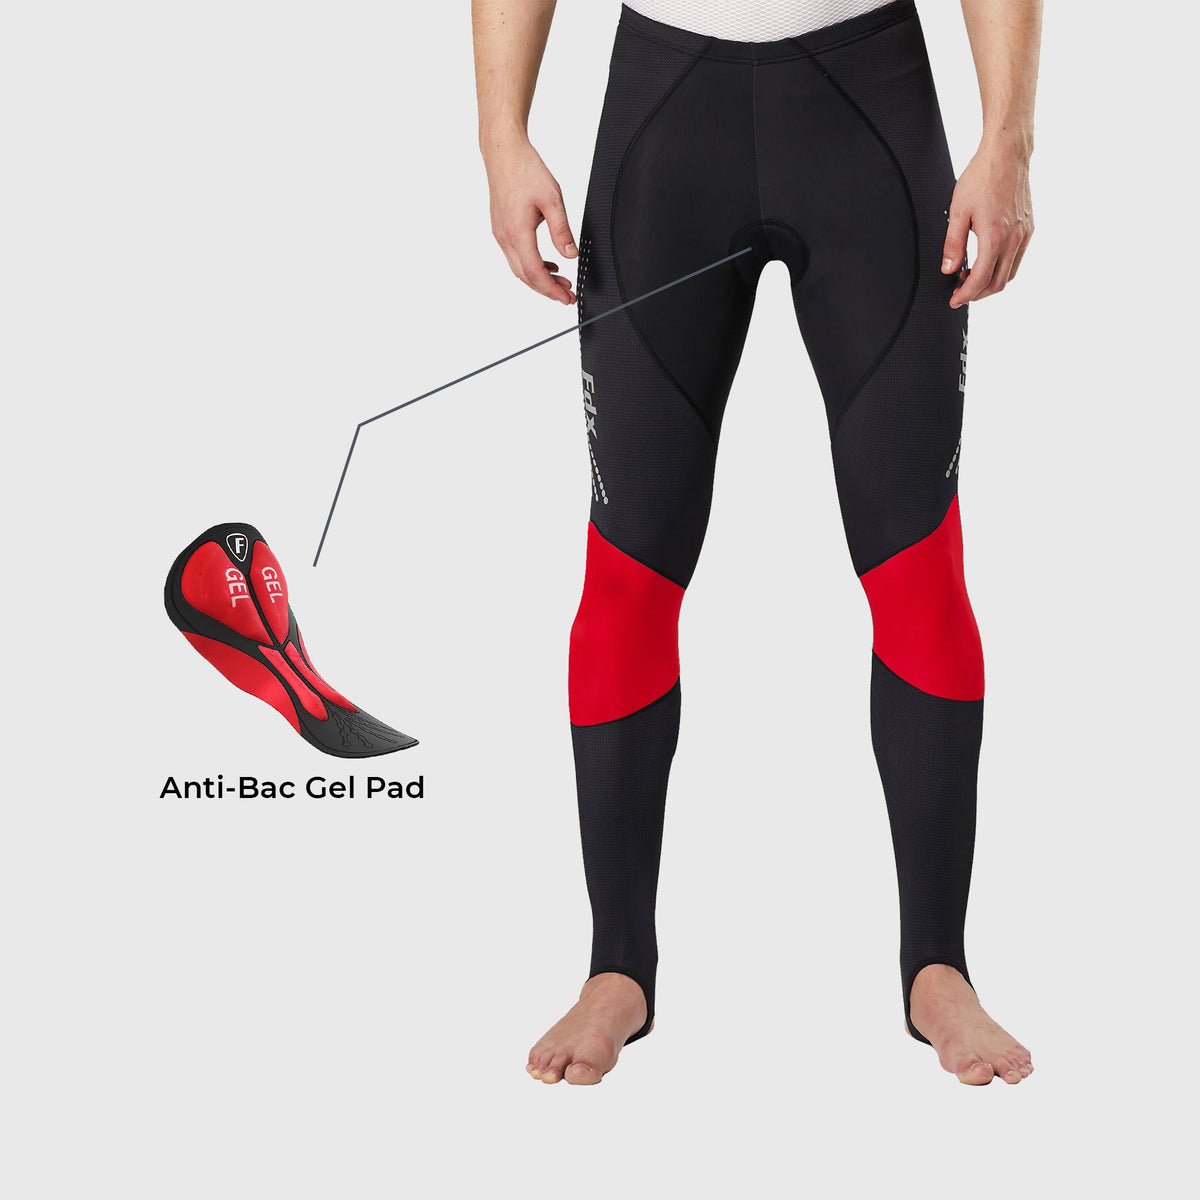  FitsT4 Men's Thermal Fleece Lined Cycling Tights Water